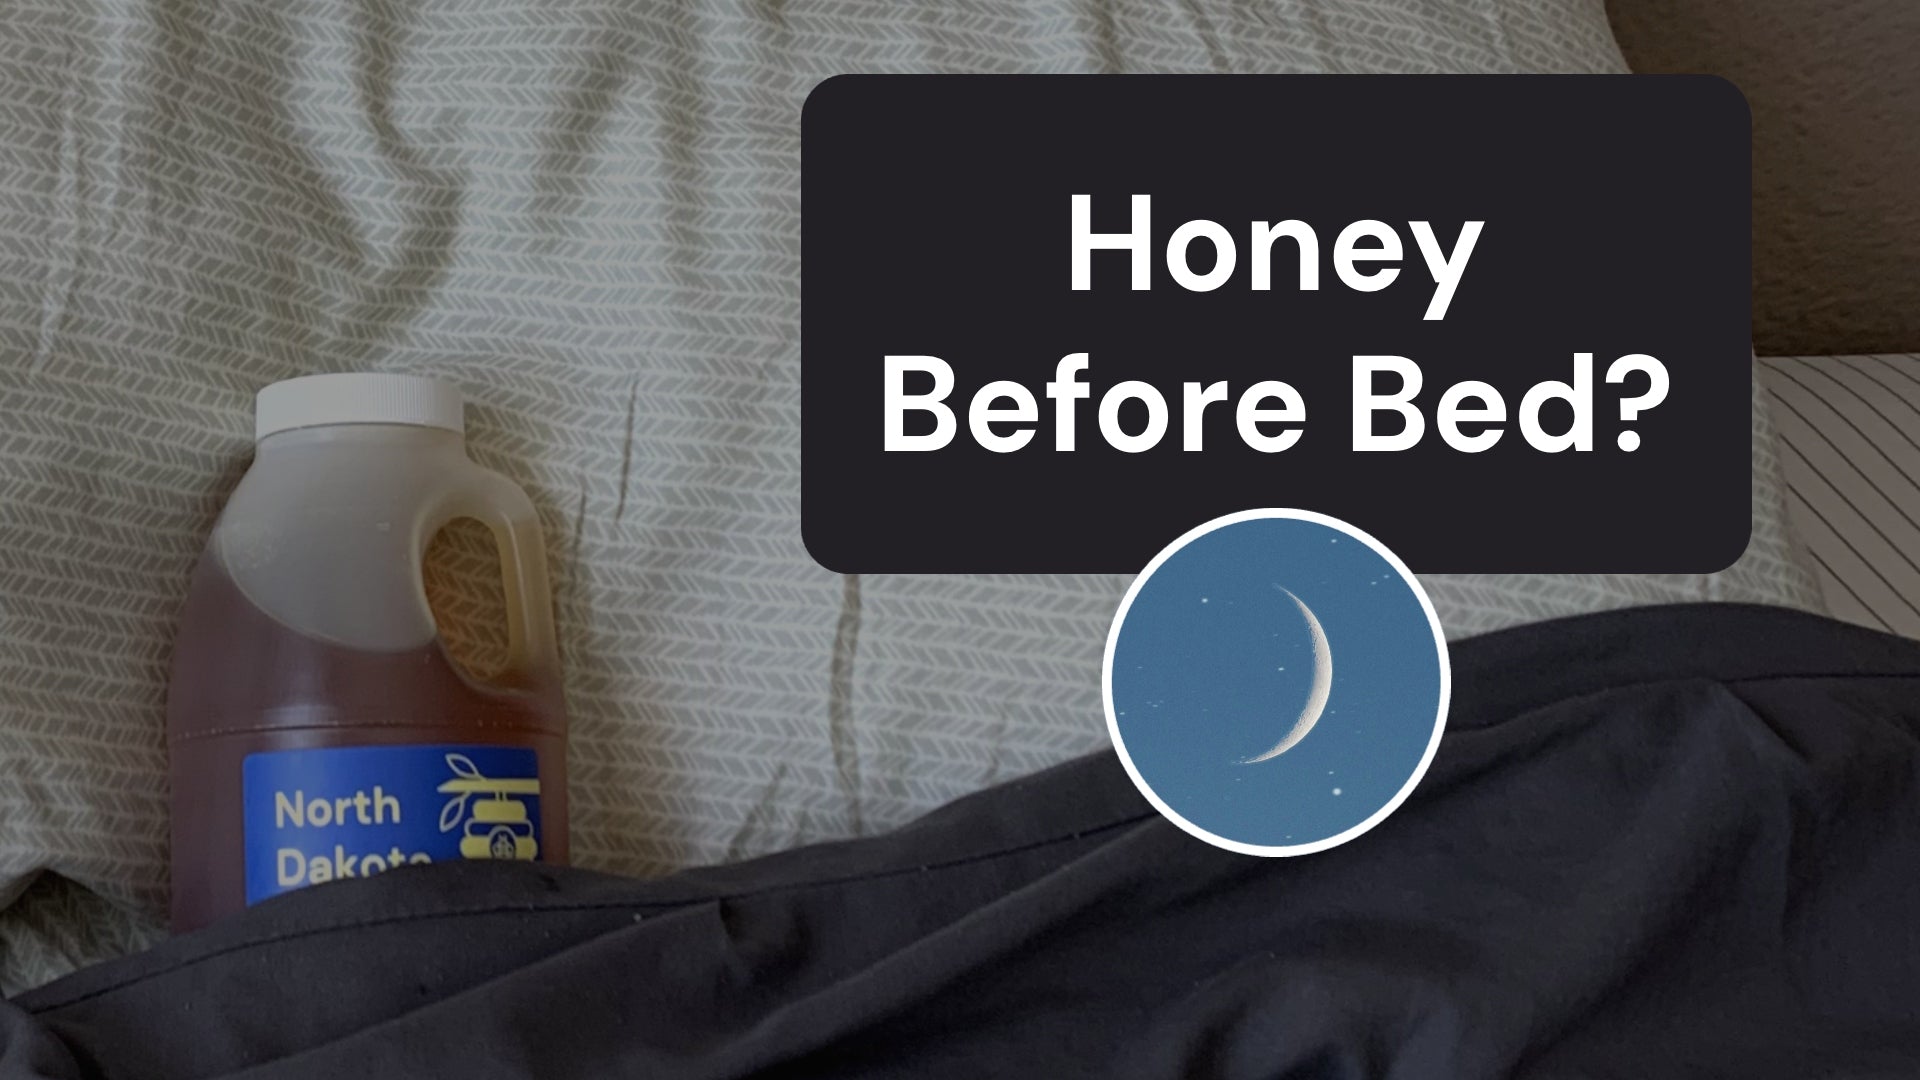 Does Honey Before Bed Help You Sleep Better?